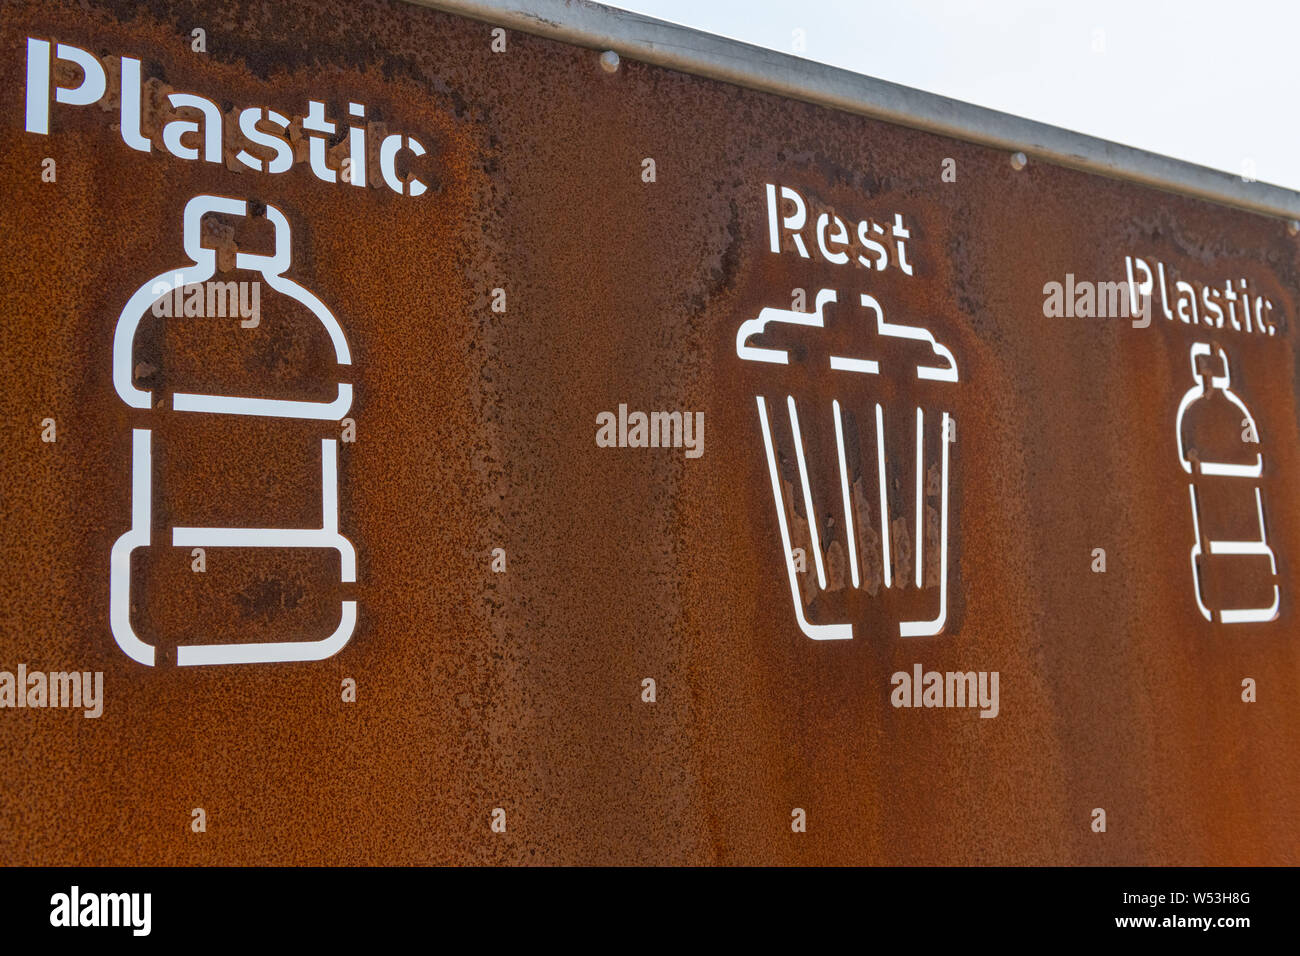 Plastic and rest waste recycle bins. Stock Photo